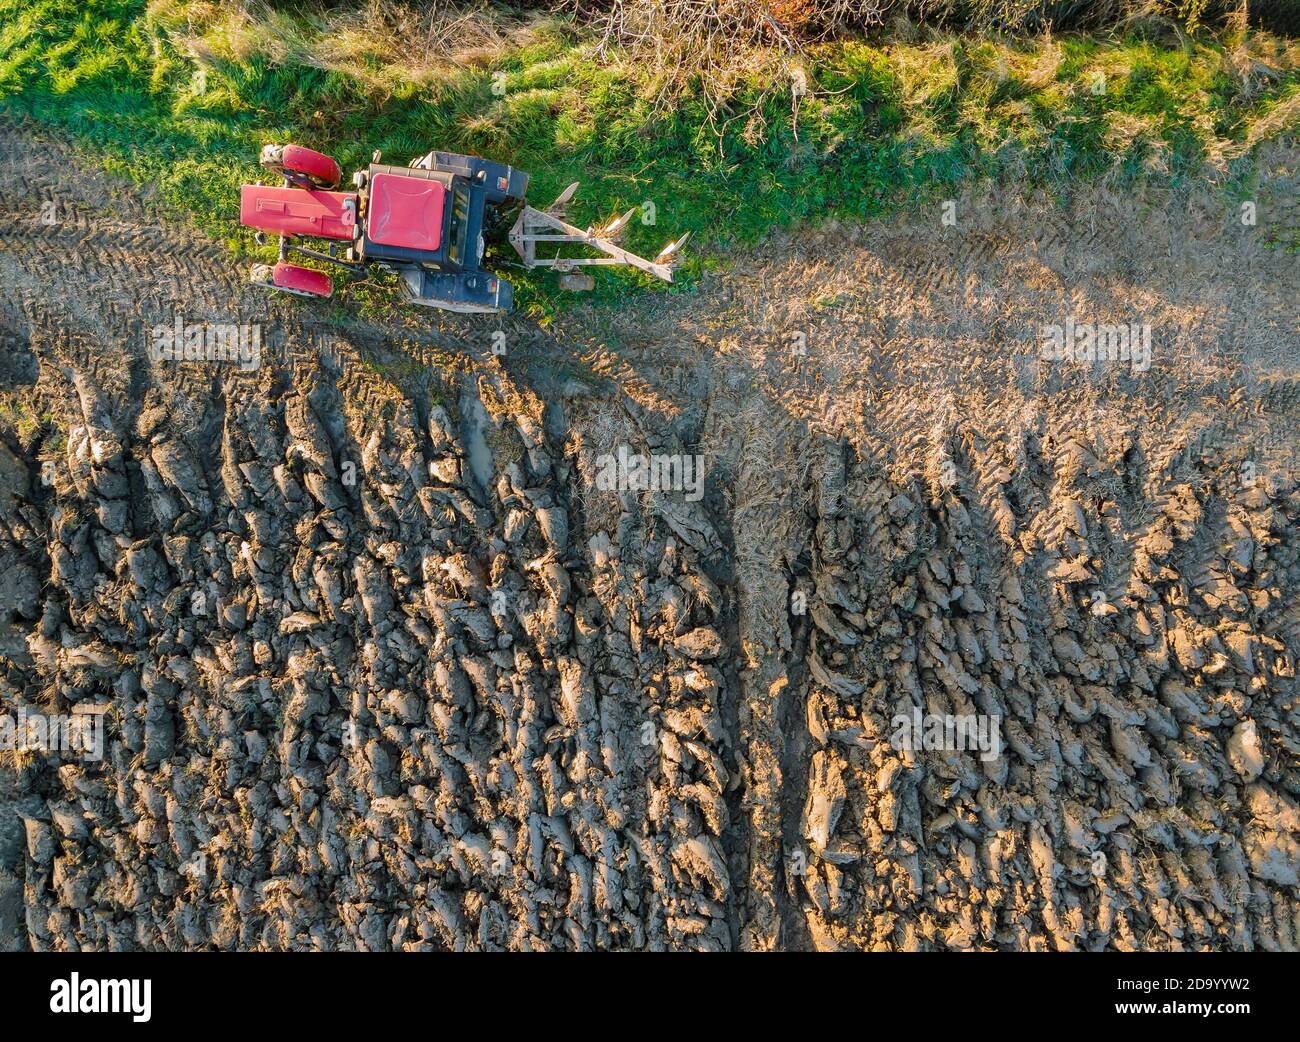 Tractor plowing fields preparing land for soil sowing grain Stock Photo